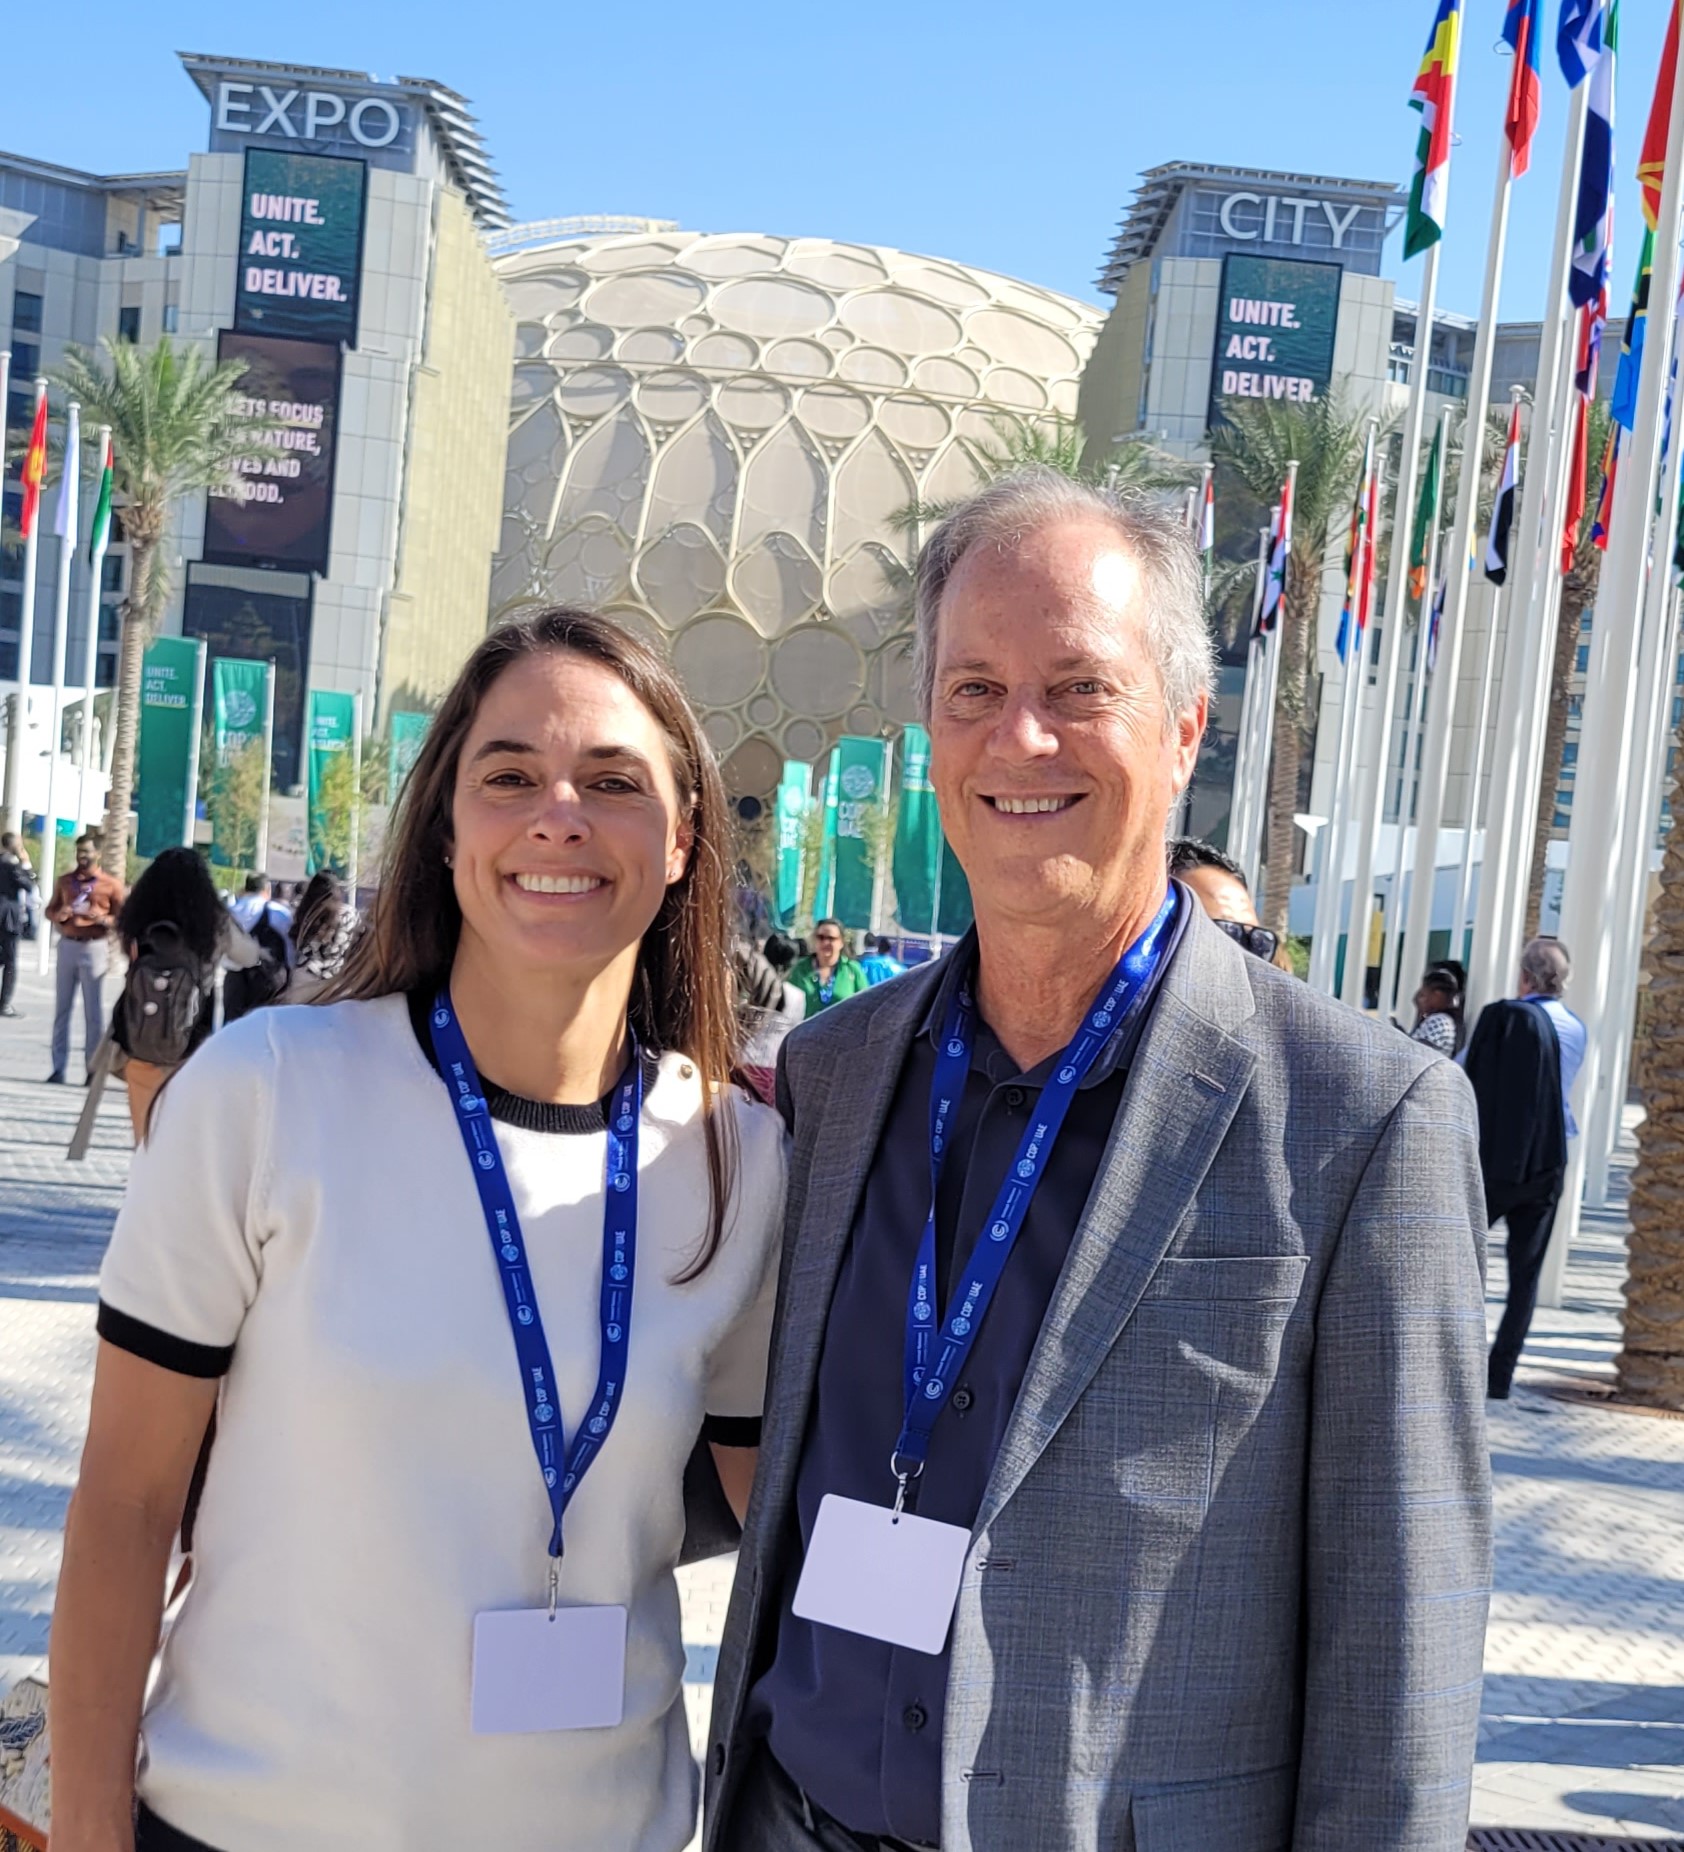 Broward County Chief Resiliency Officer, Dr. Jennifer Jurado and Broward Vice Mayor Beam Furr join world leaders at U.N. Climate Change Conference in Dubai.